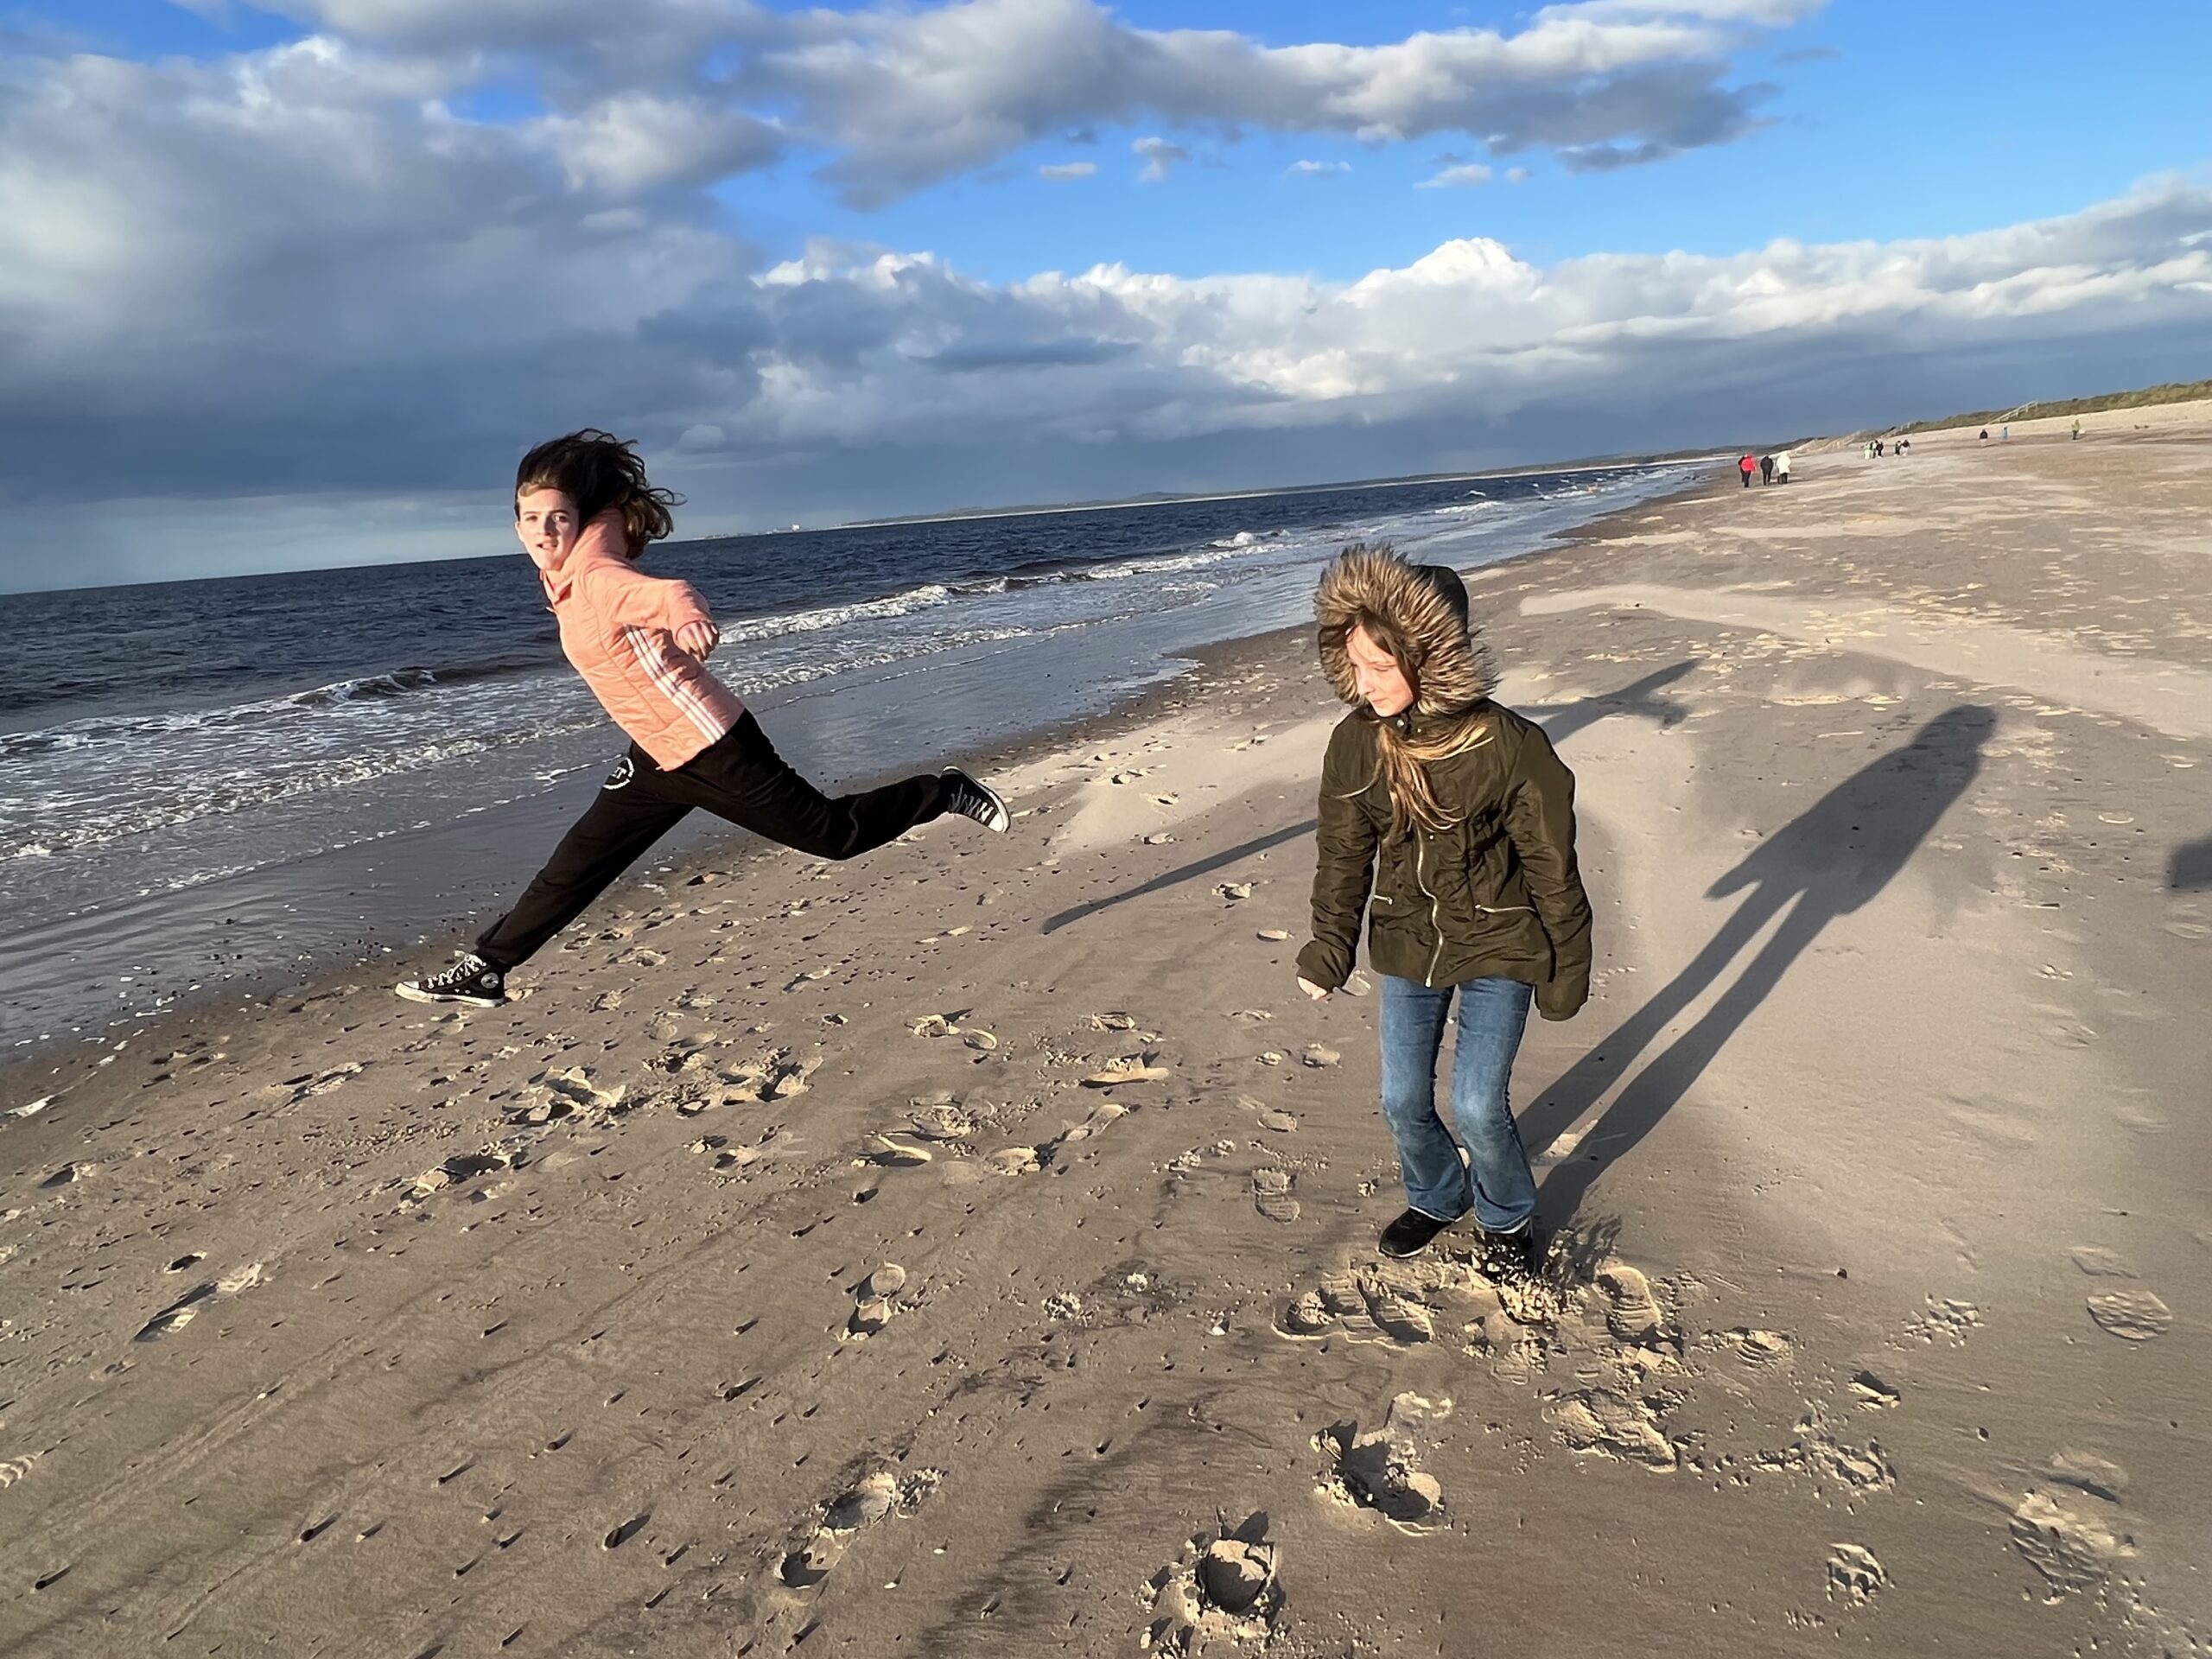 Two kids play on a beach